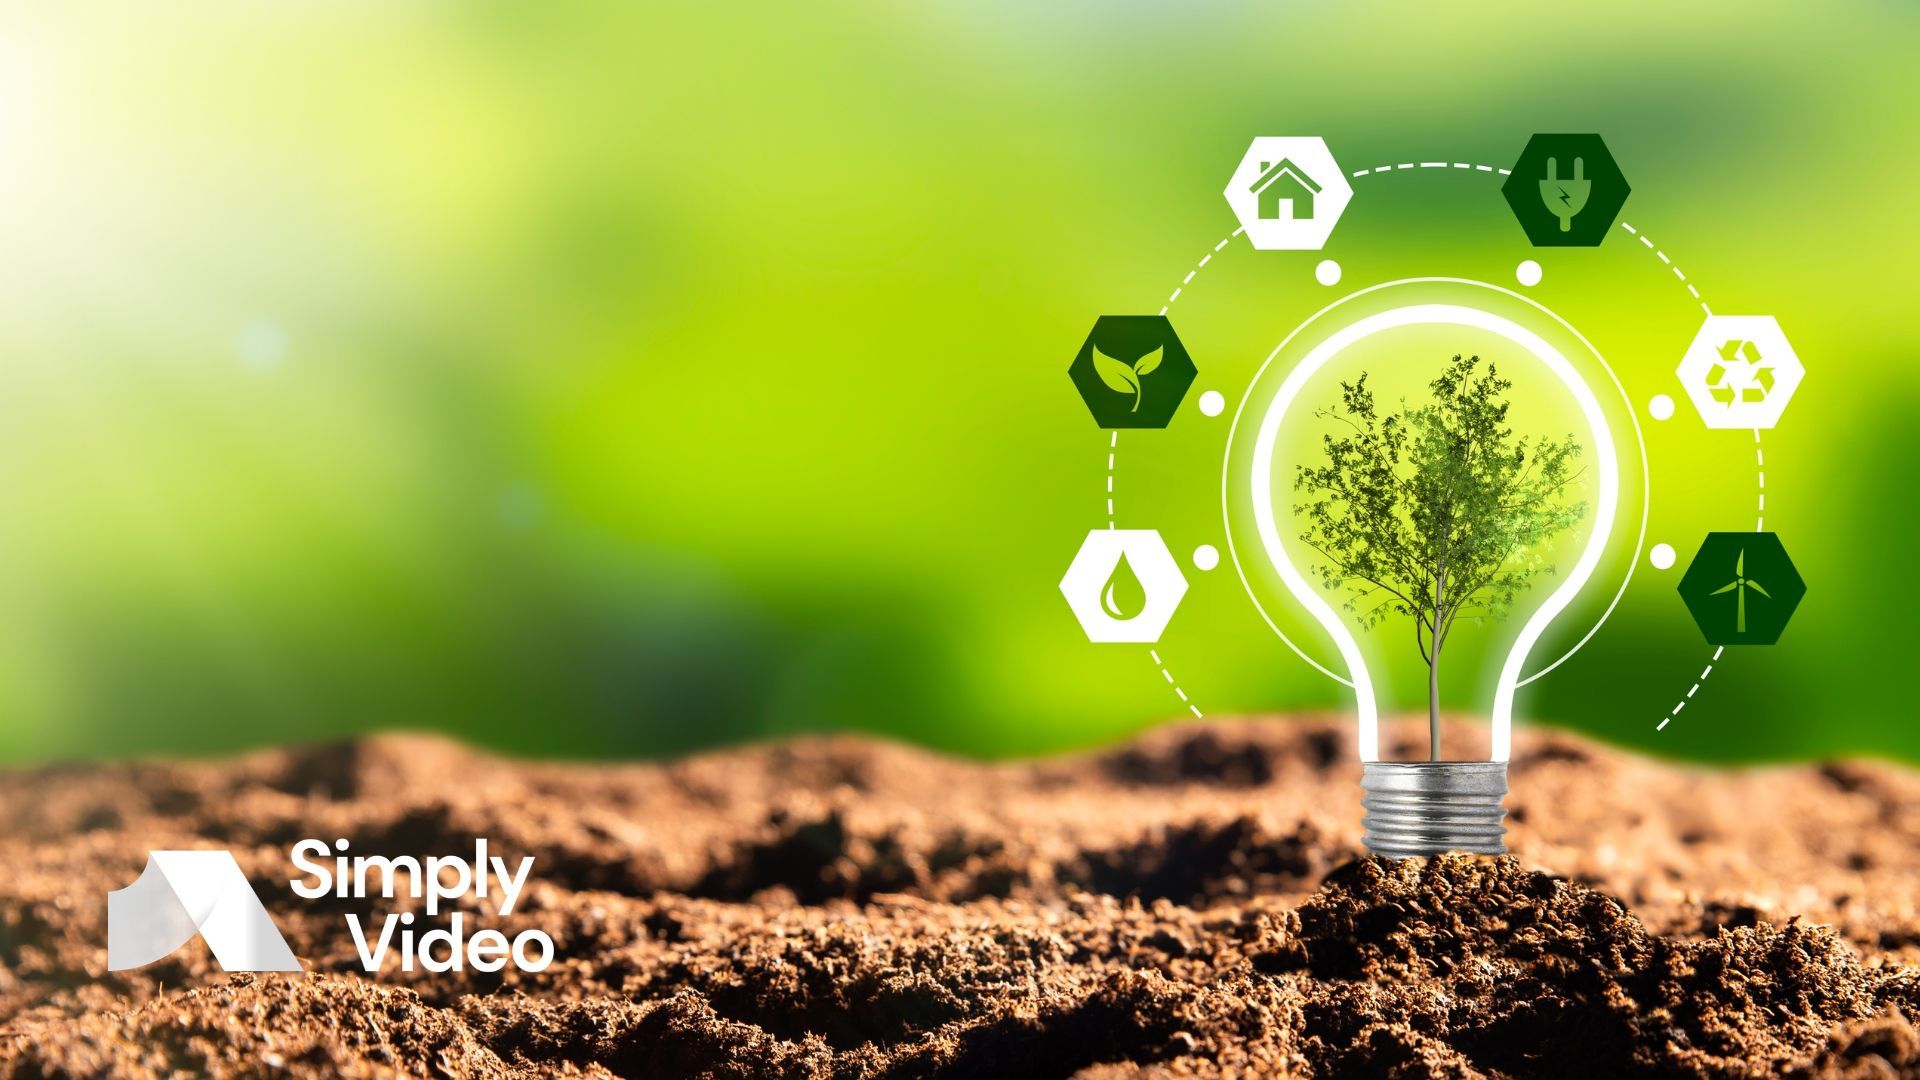 Is your enterprise trying to meet sustainability targets? XR is a valuable tool in your toolbox. Hop on board as we explore the environmental case for XR.